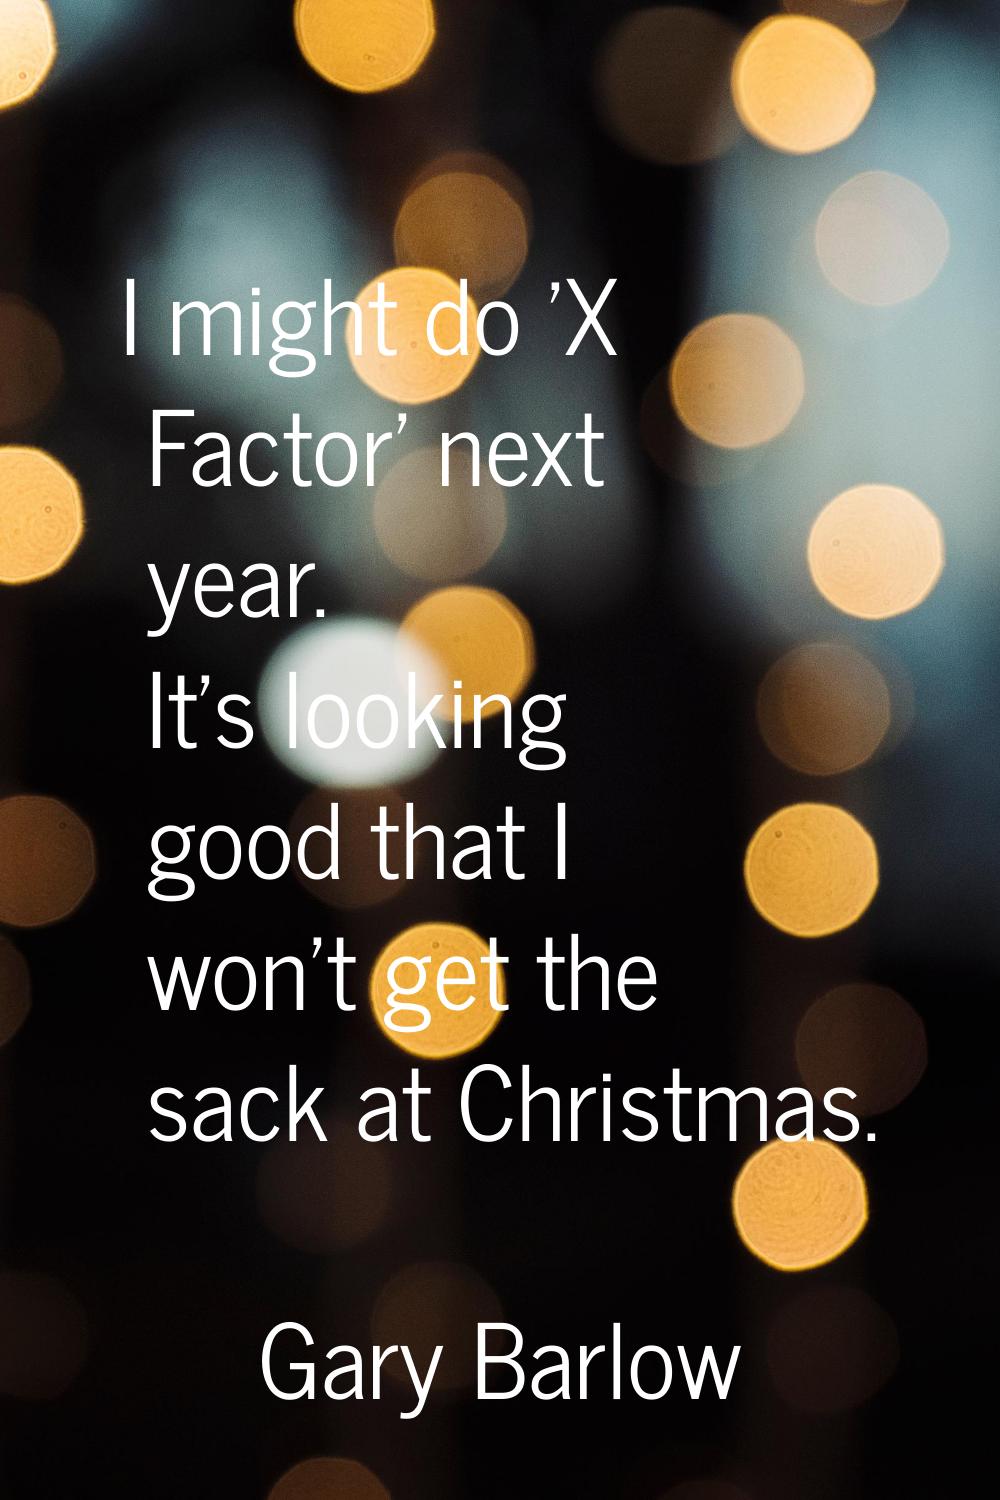 I might do 'X Factor' next year. It's looking good that I won't get the sack at Christmas.